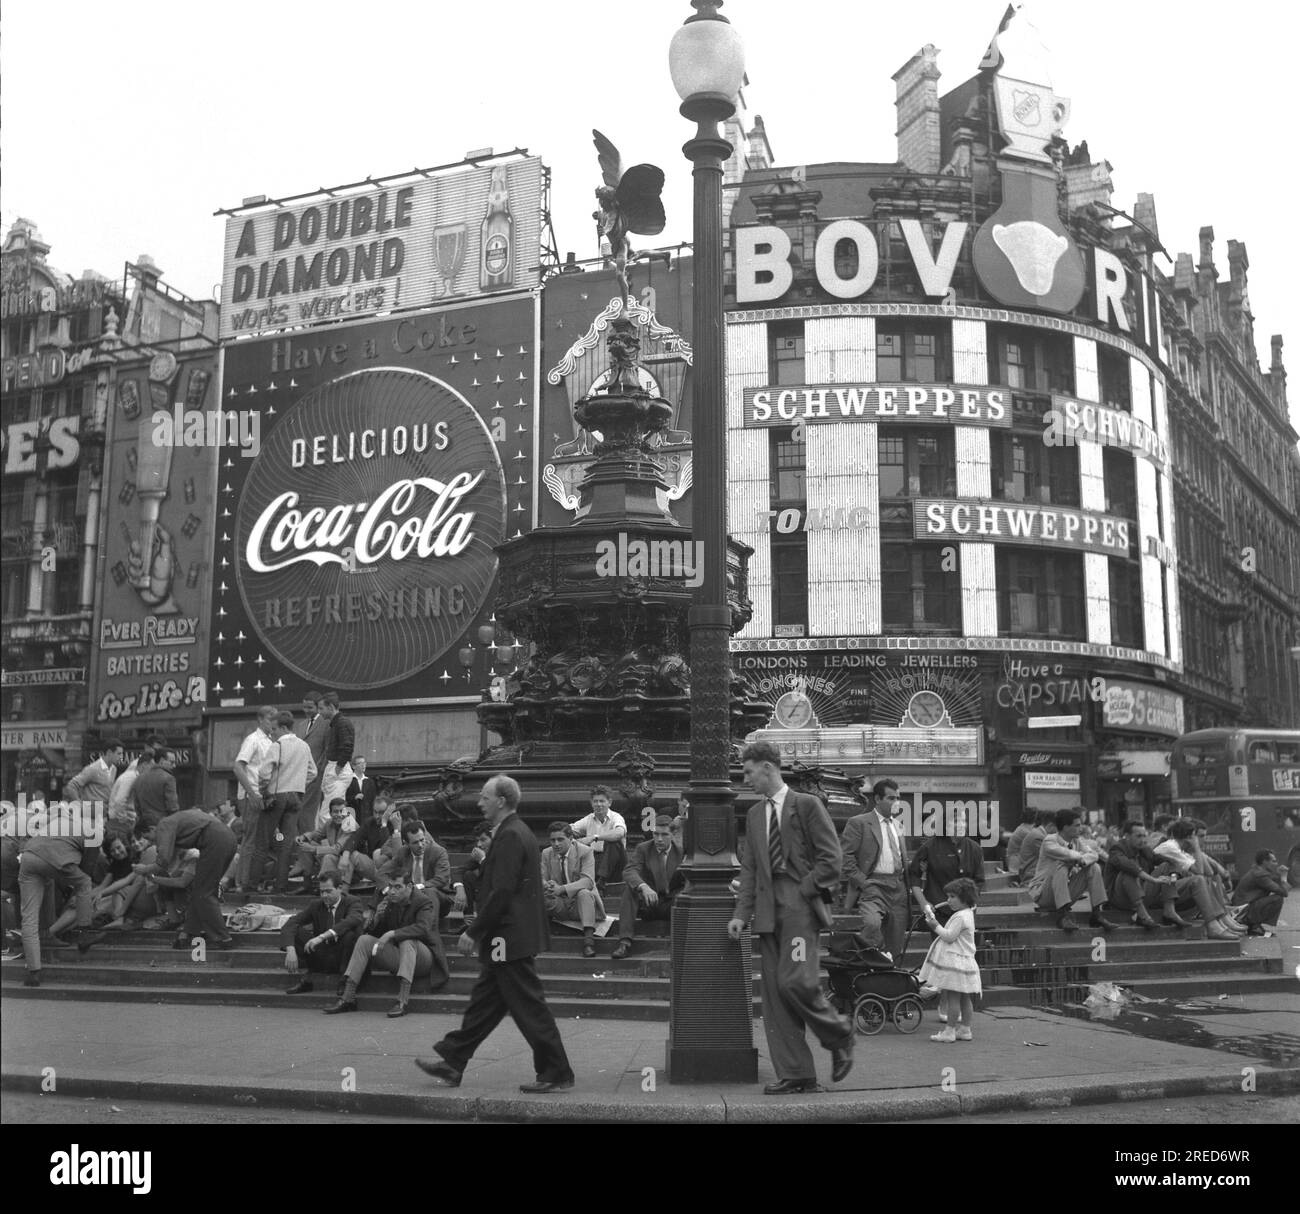 City views of London in the 1950s : Piccadilly Circus 03.08.1959 [automated translation] Stock Photo